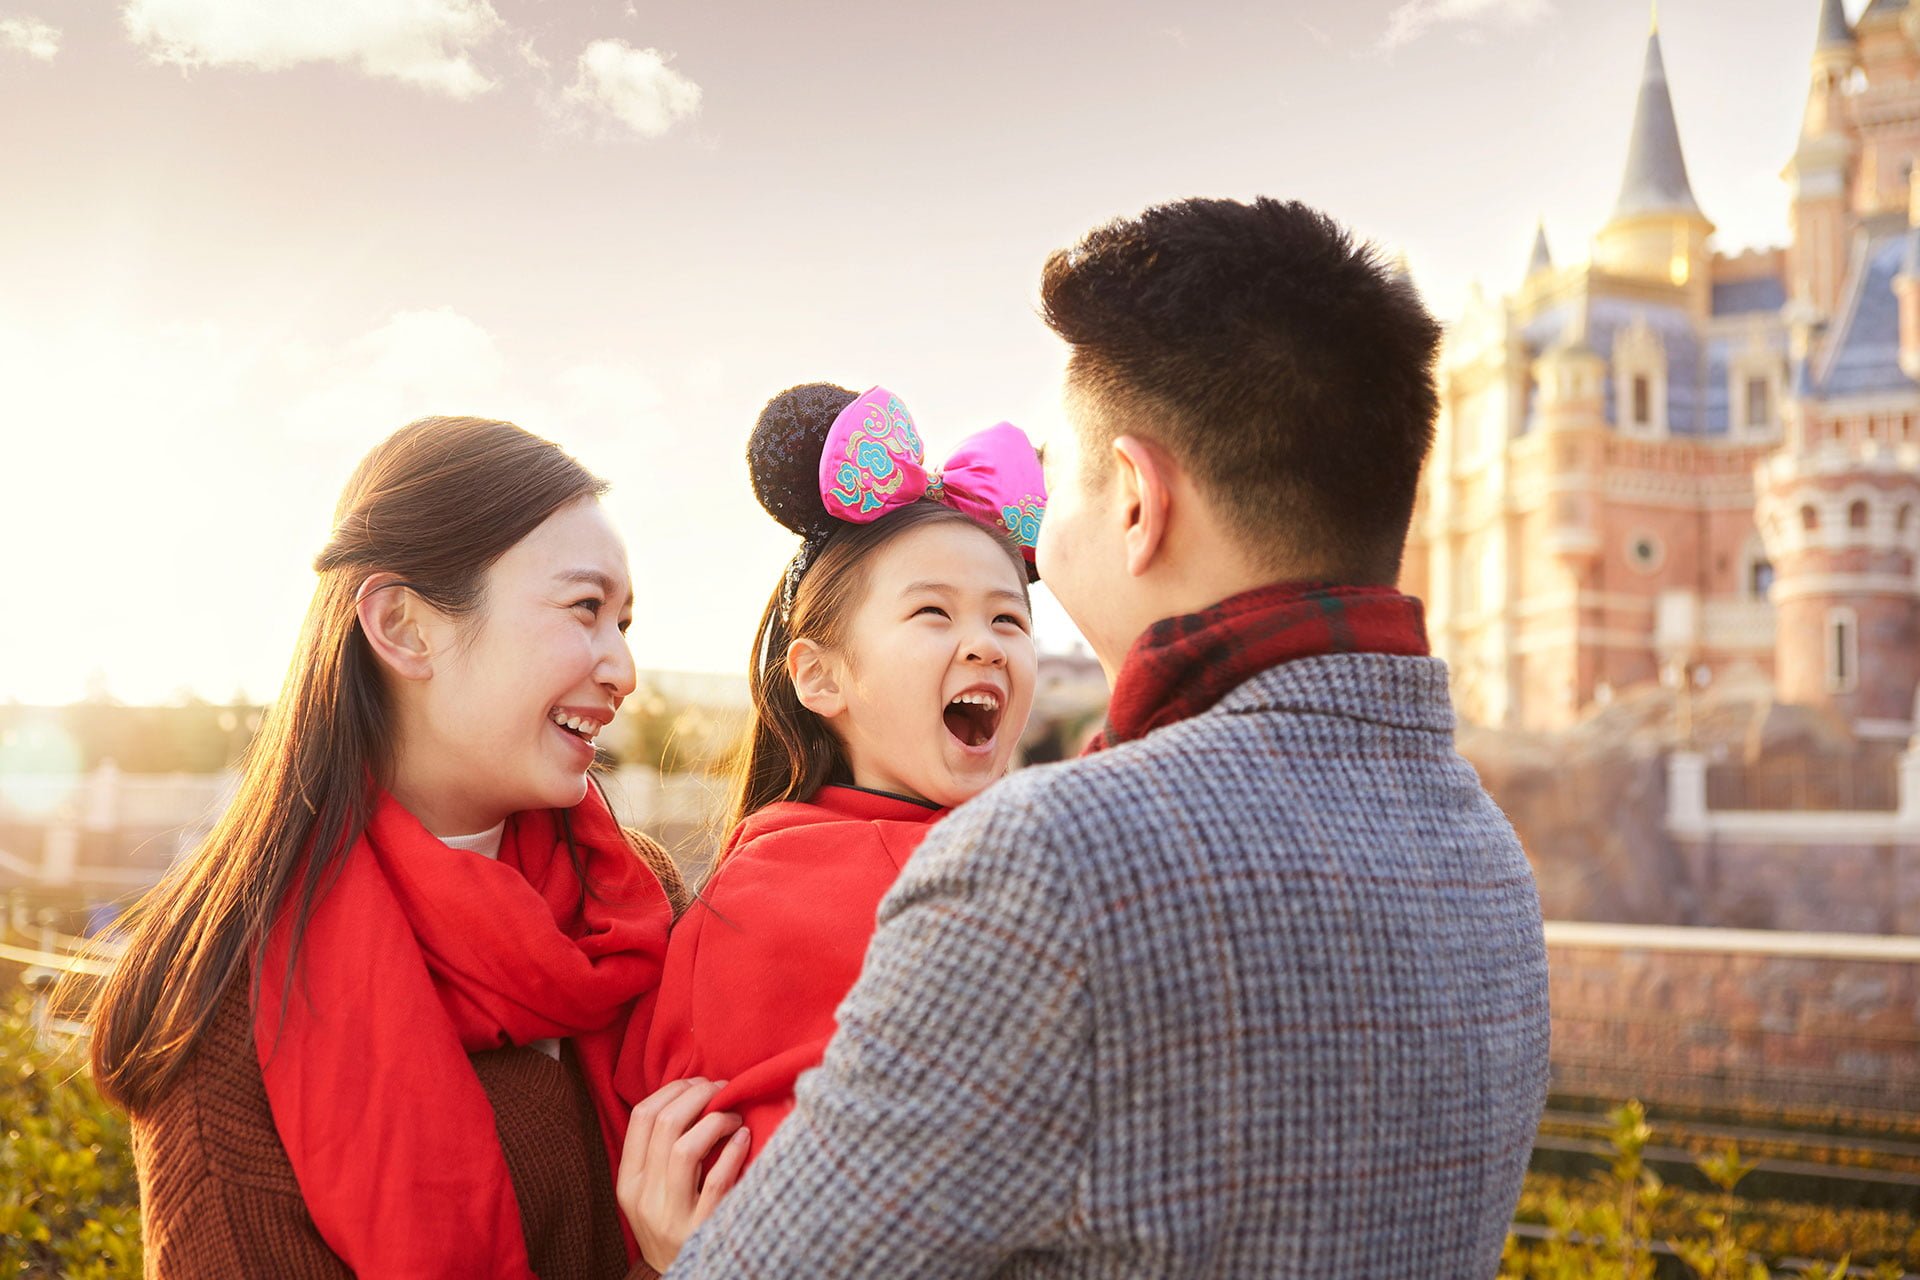 Chinese family posing for a lifestyle advertising photo set in Shanghai Disney Resort. Shanghai photo studio specialized in lifestyle photography.